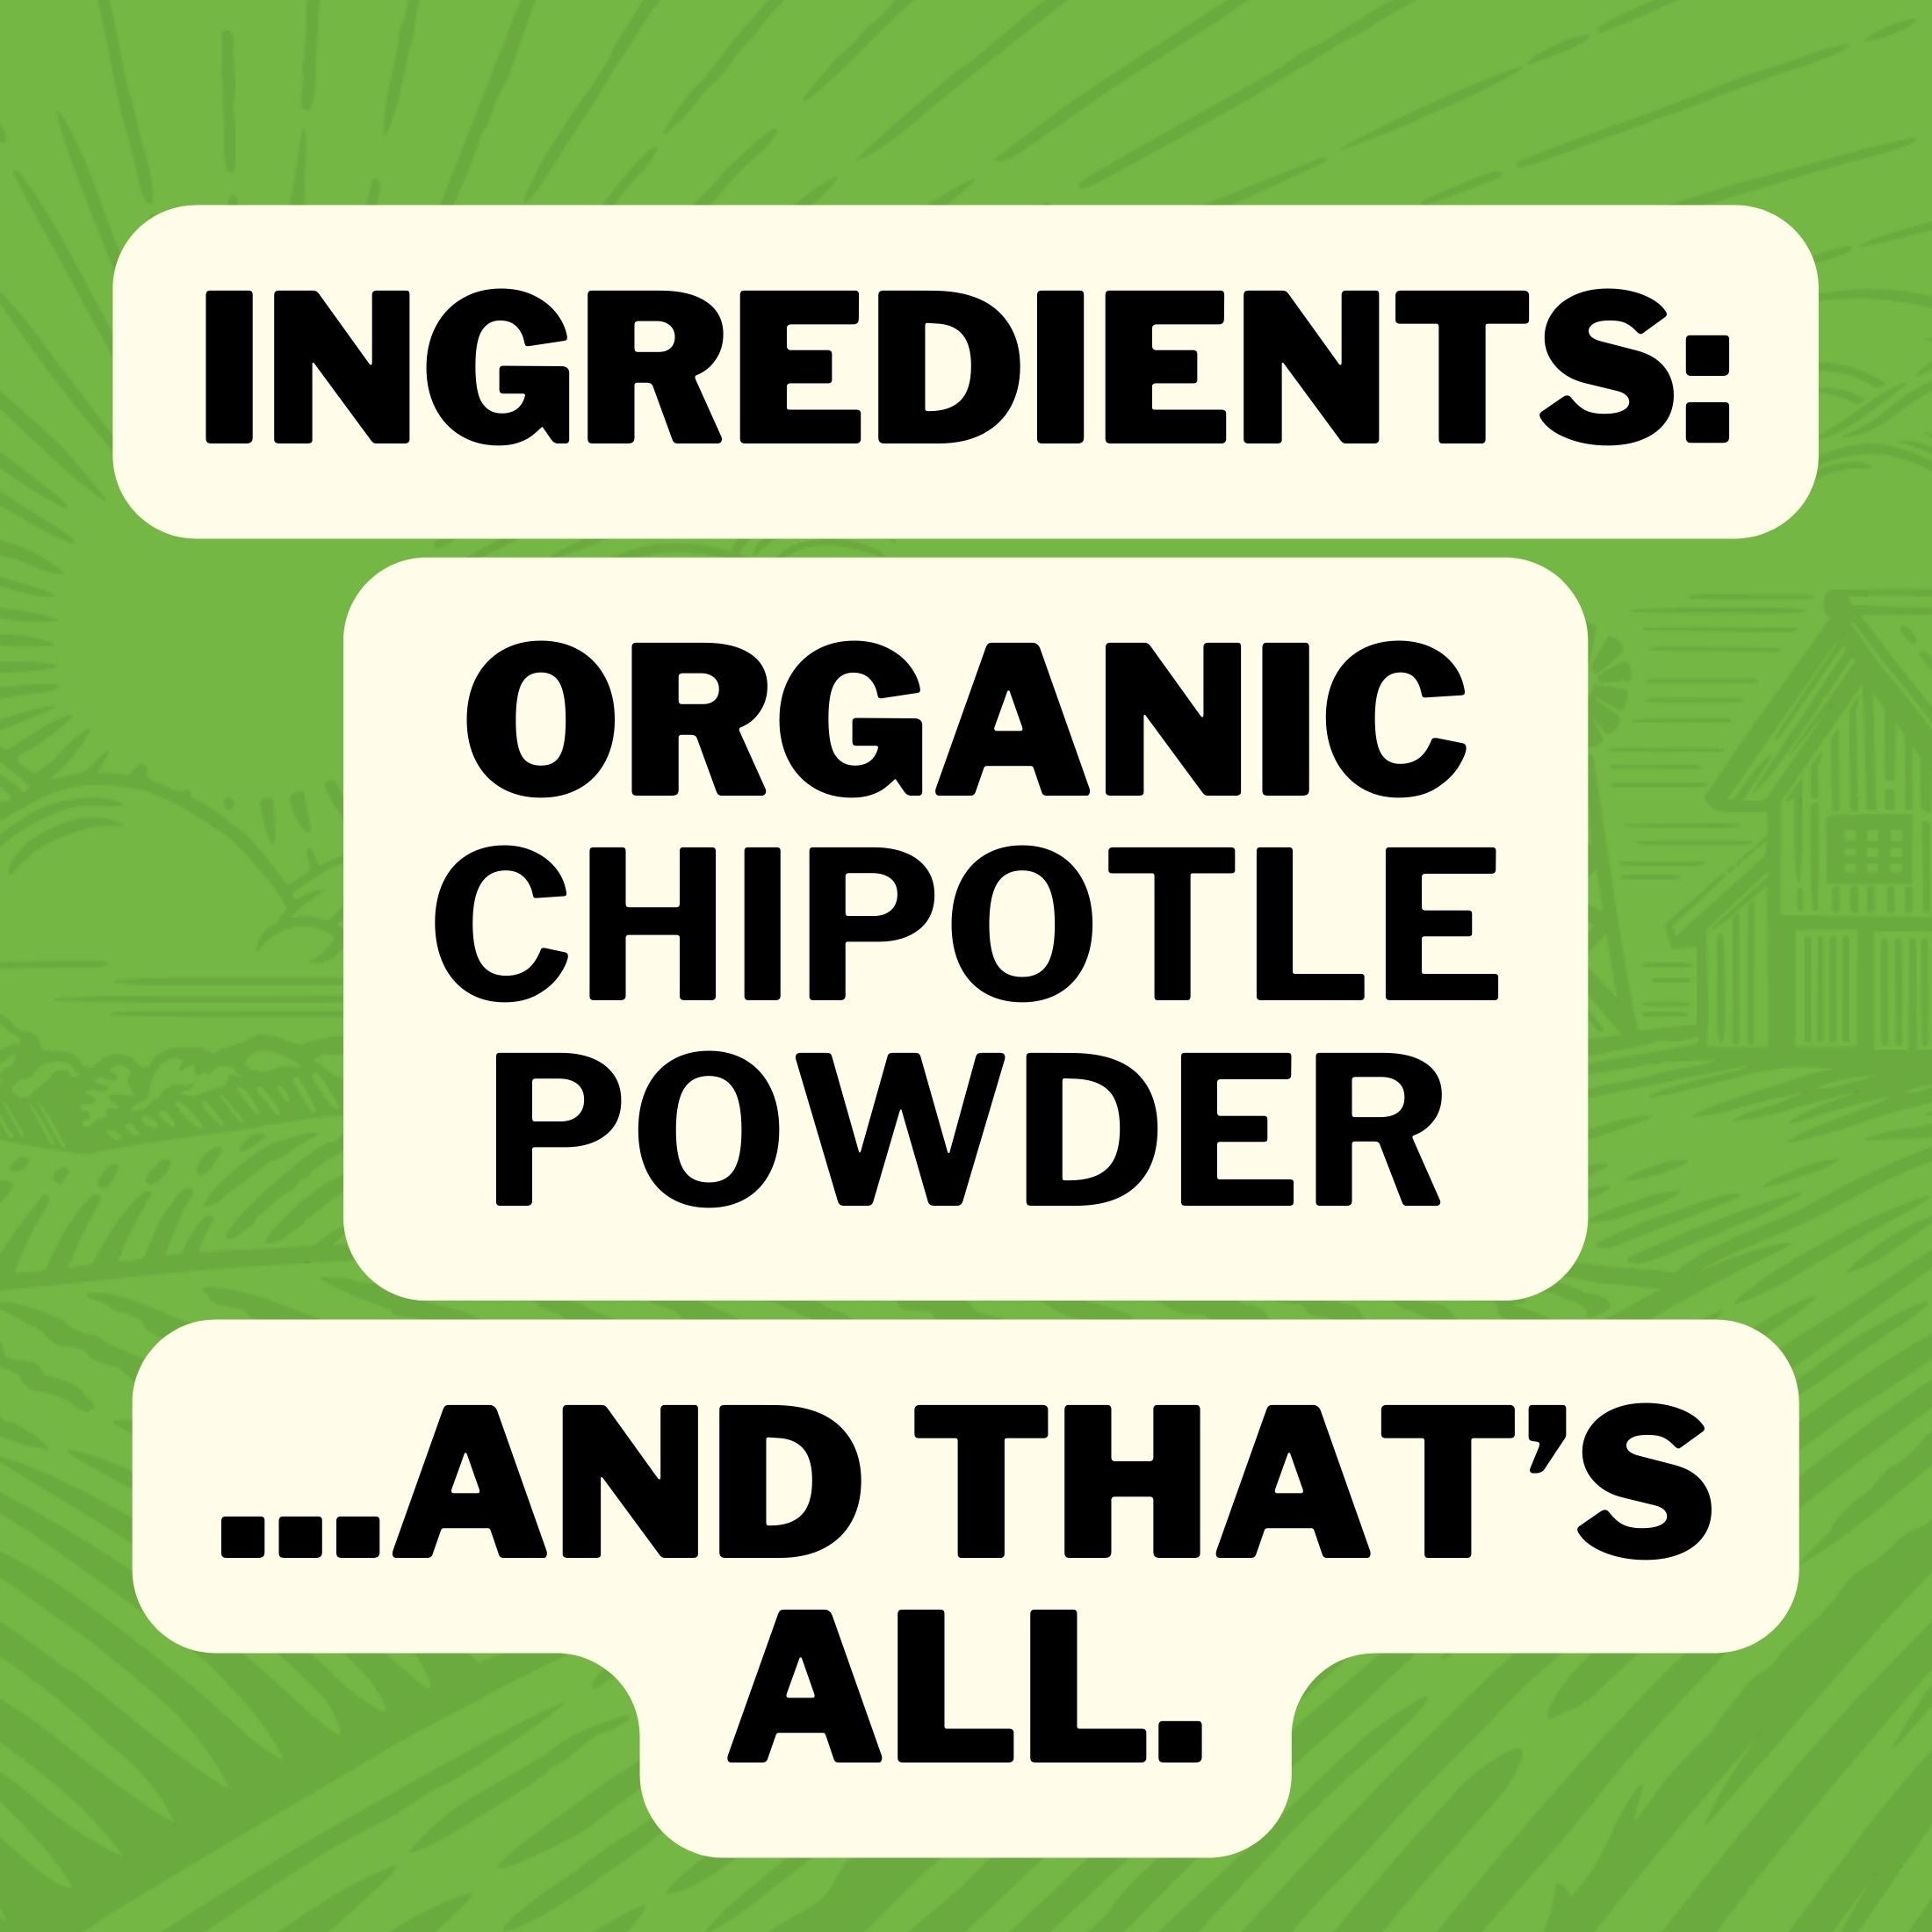 Ingredients: Organic Chipotle Powder... and that's all.